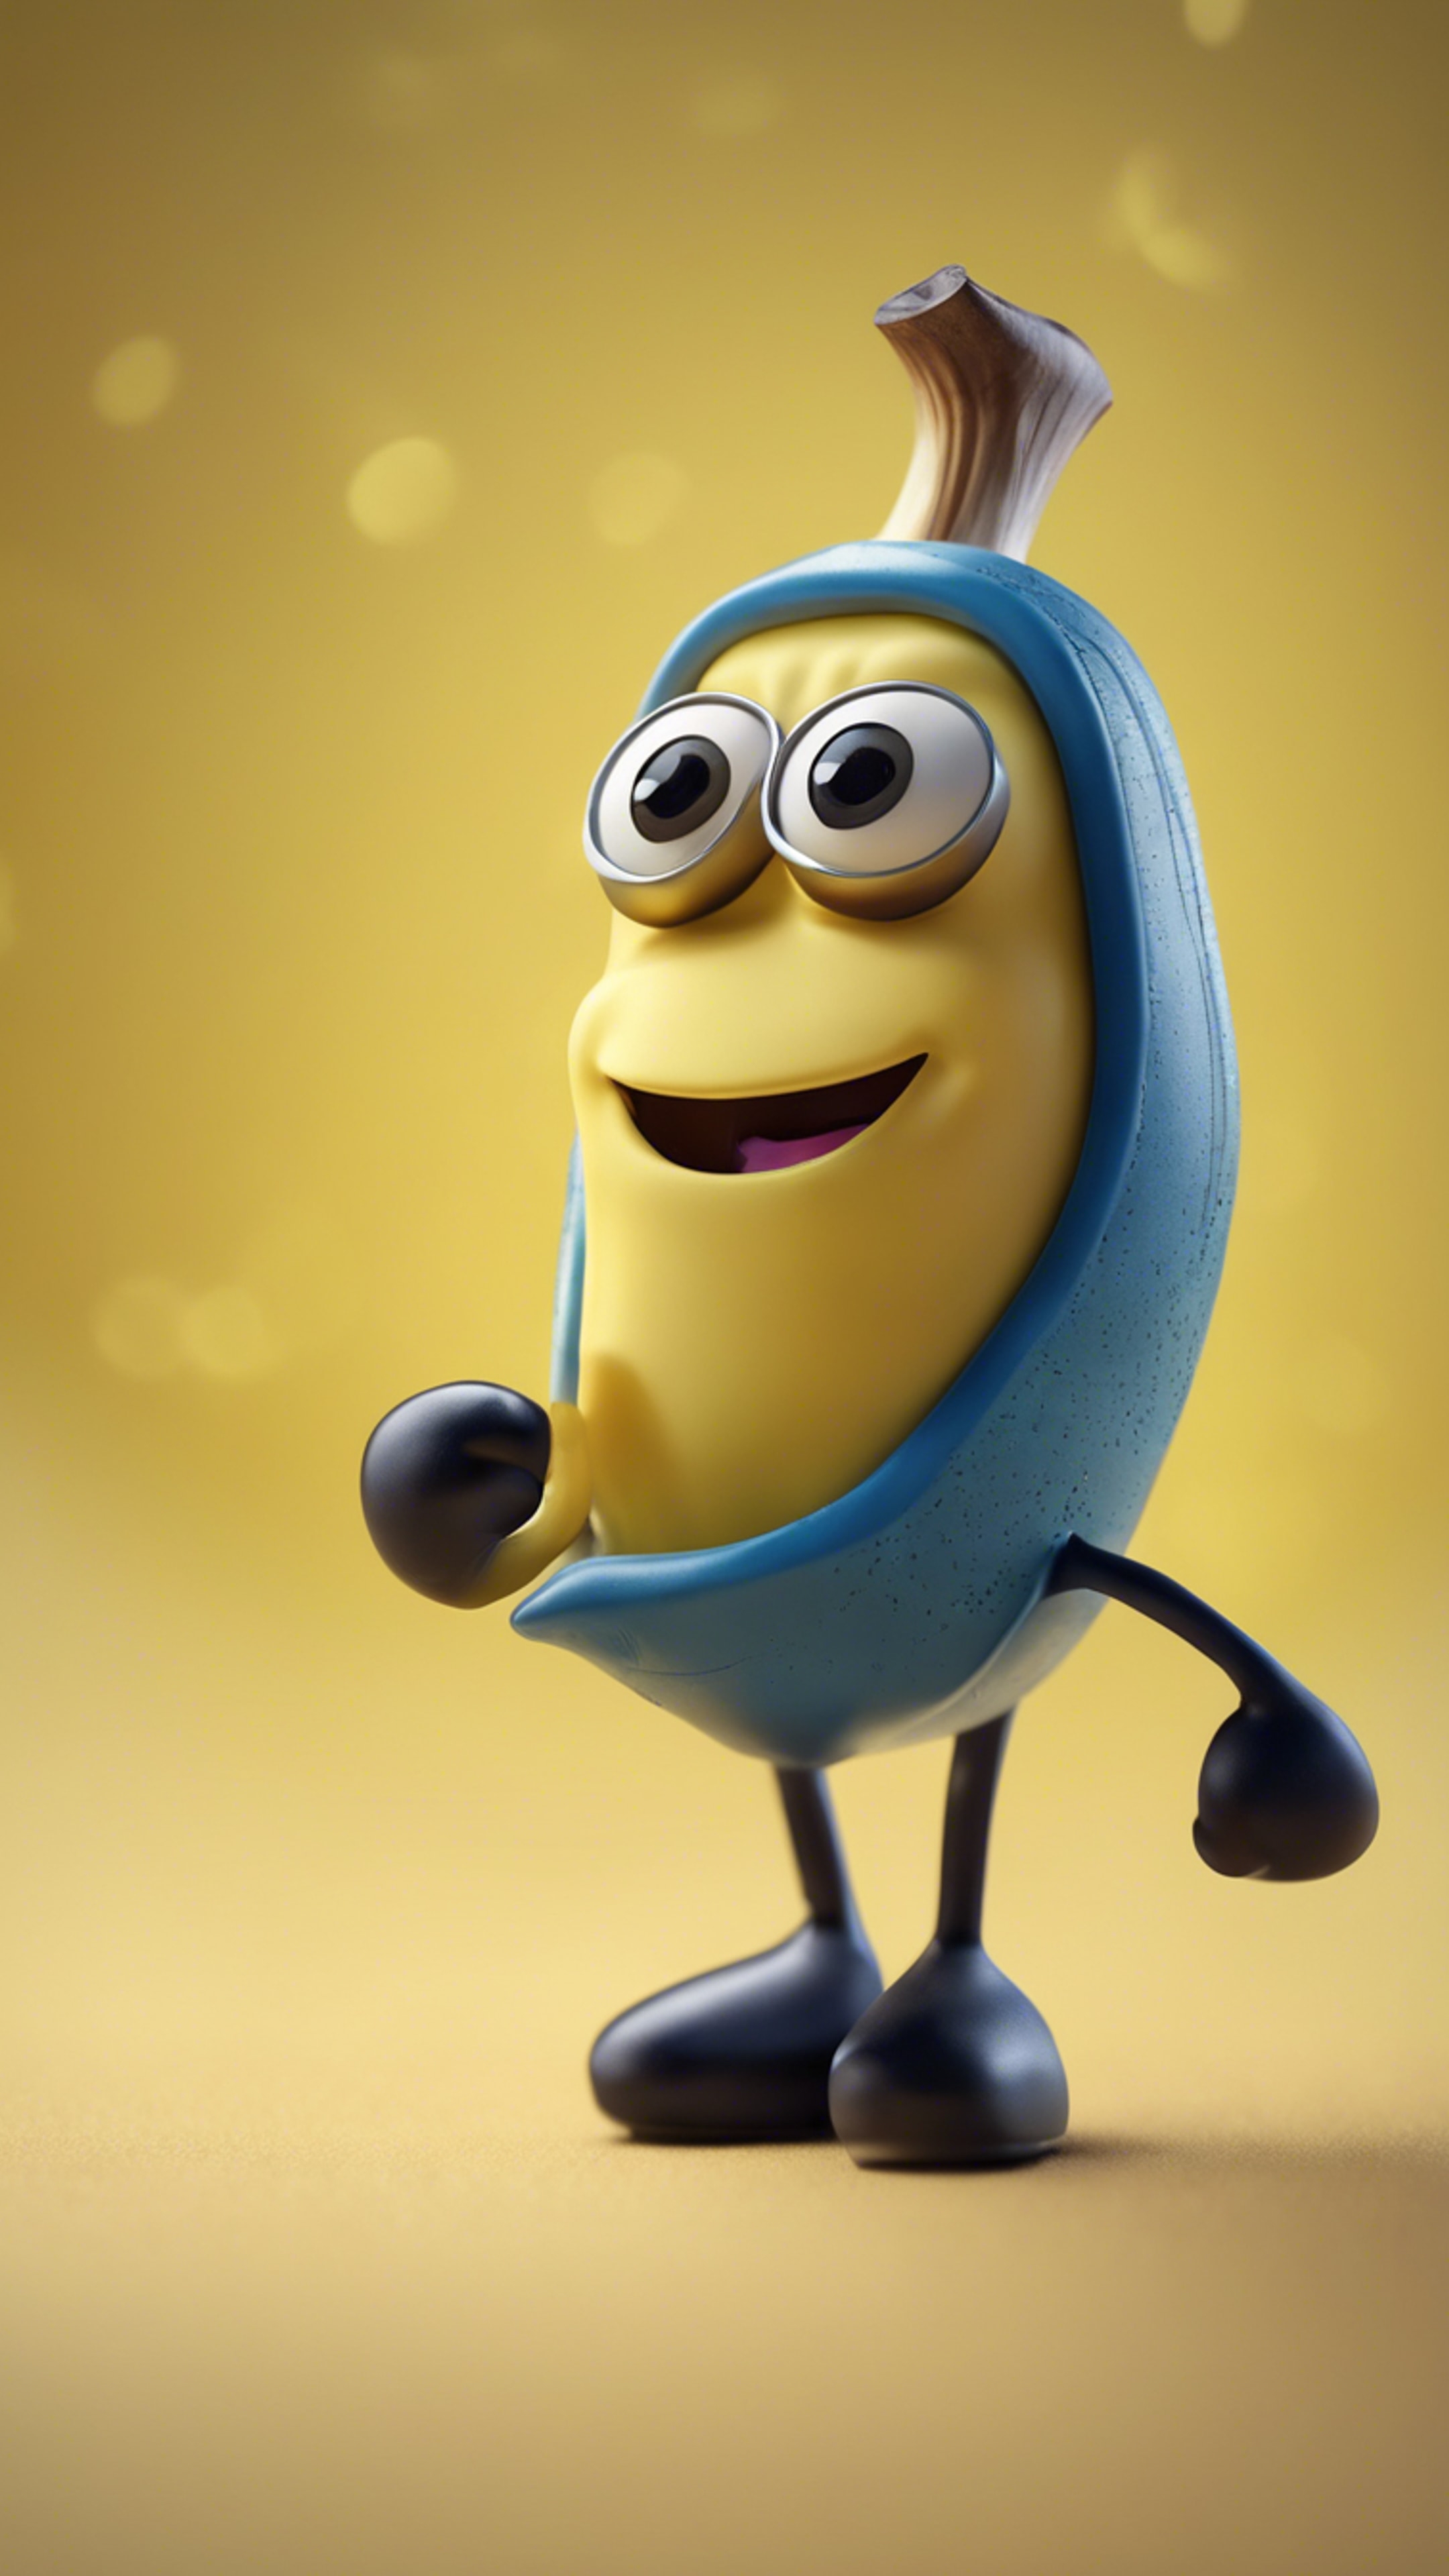 A banana animated character in a kids TV show. Тапет[134047b32d7e4822af7d]